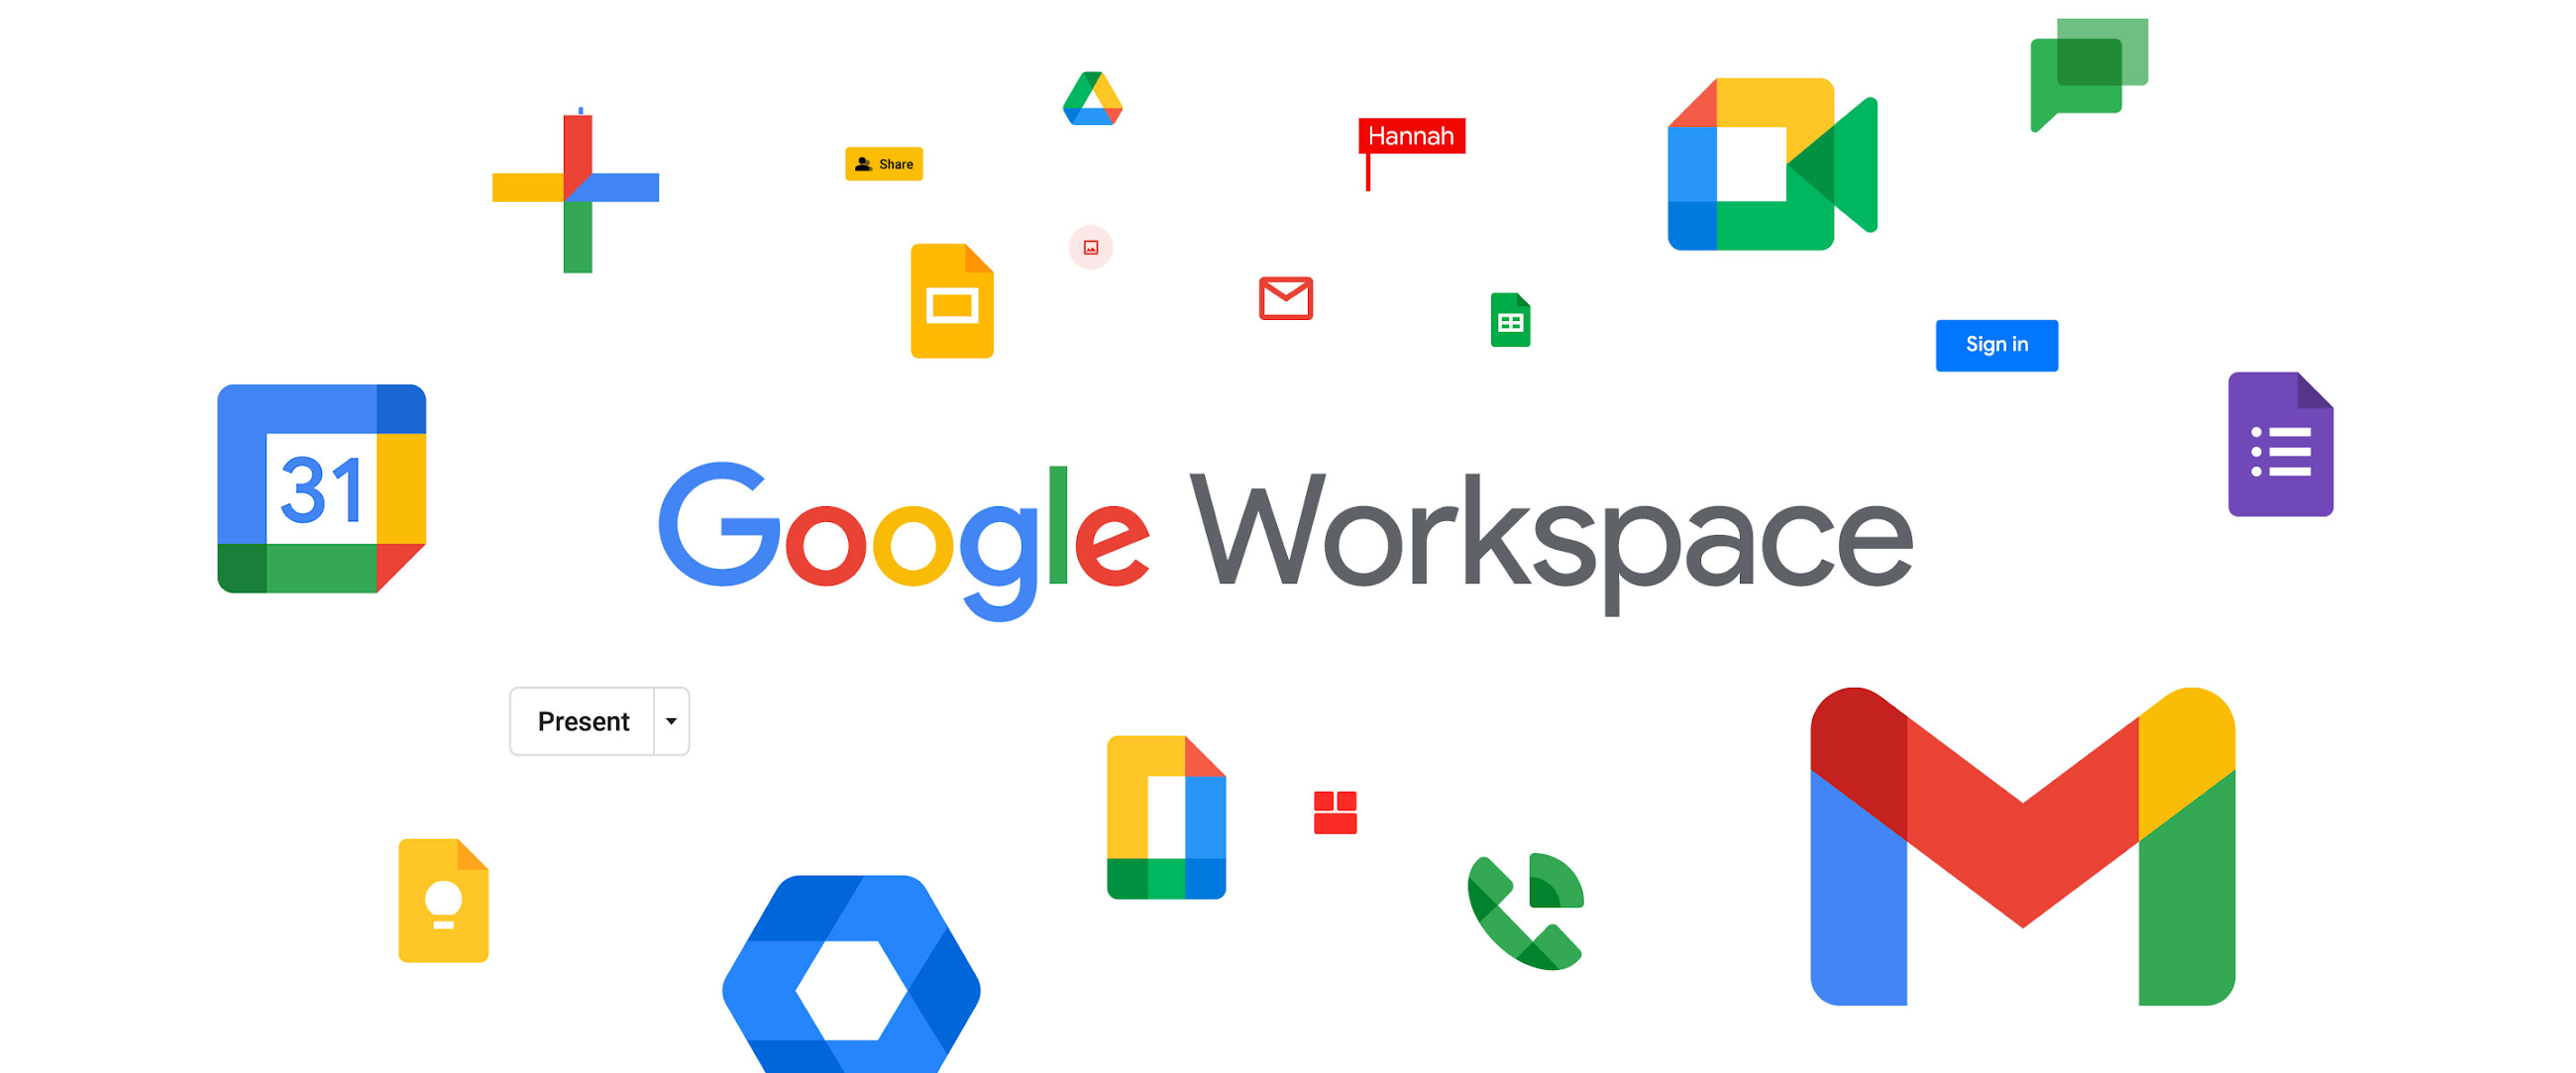 Available free training and tutorials for Google Workspace